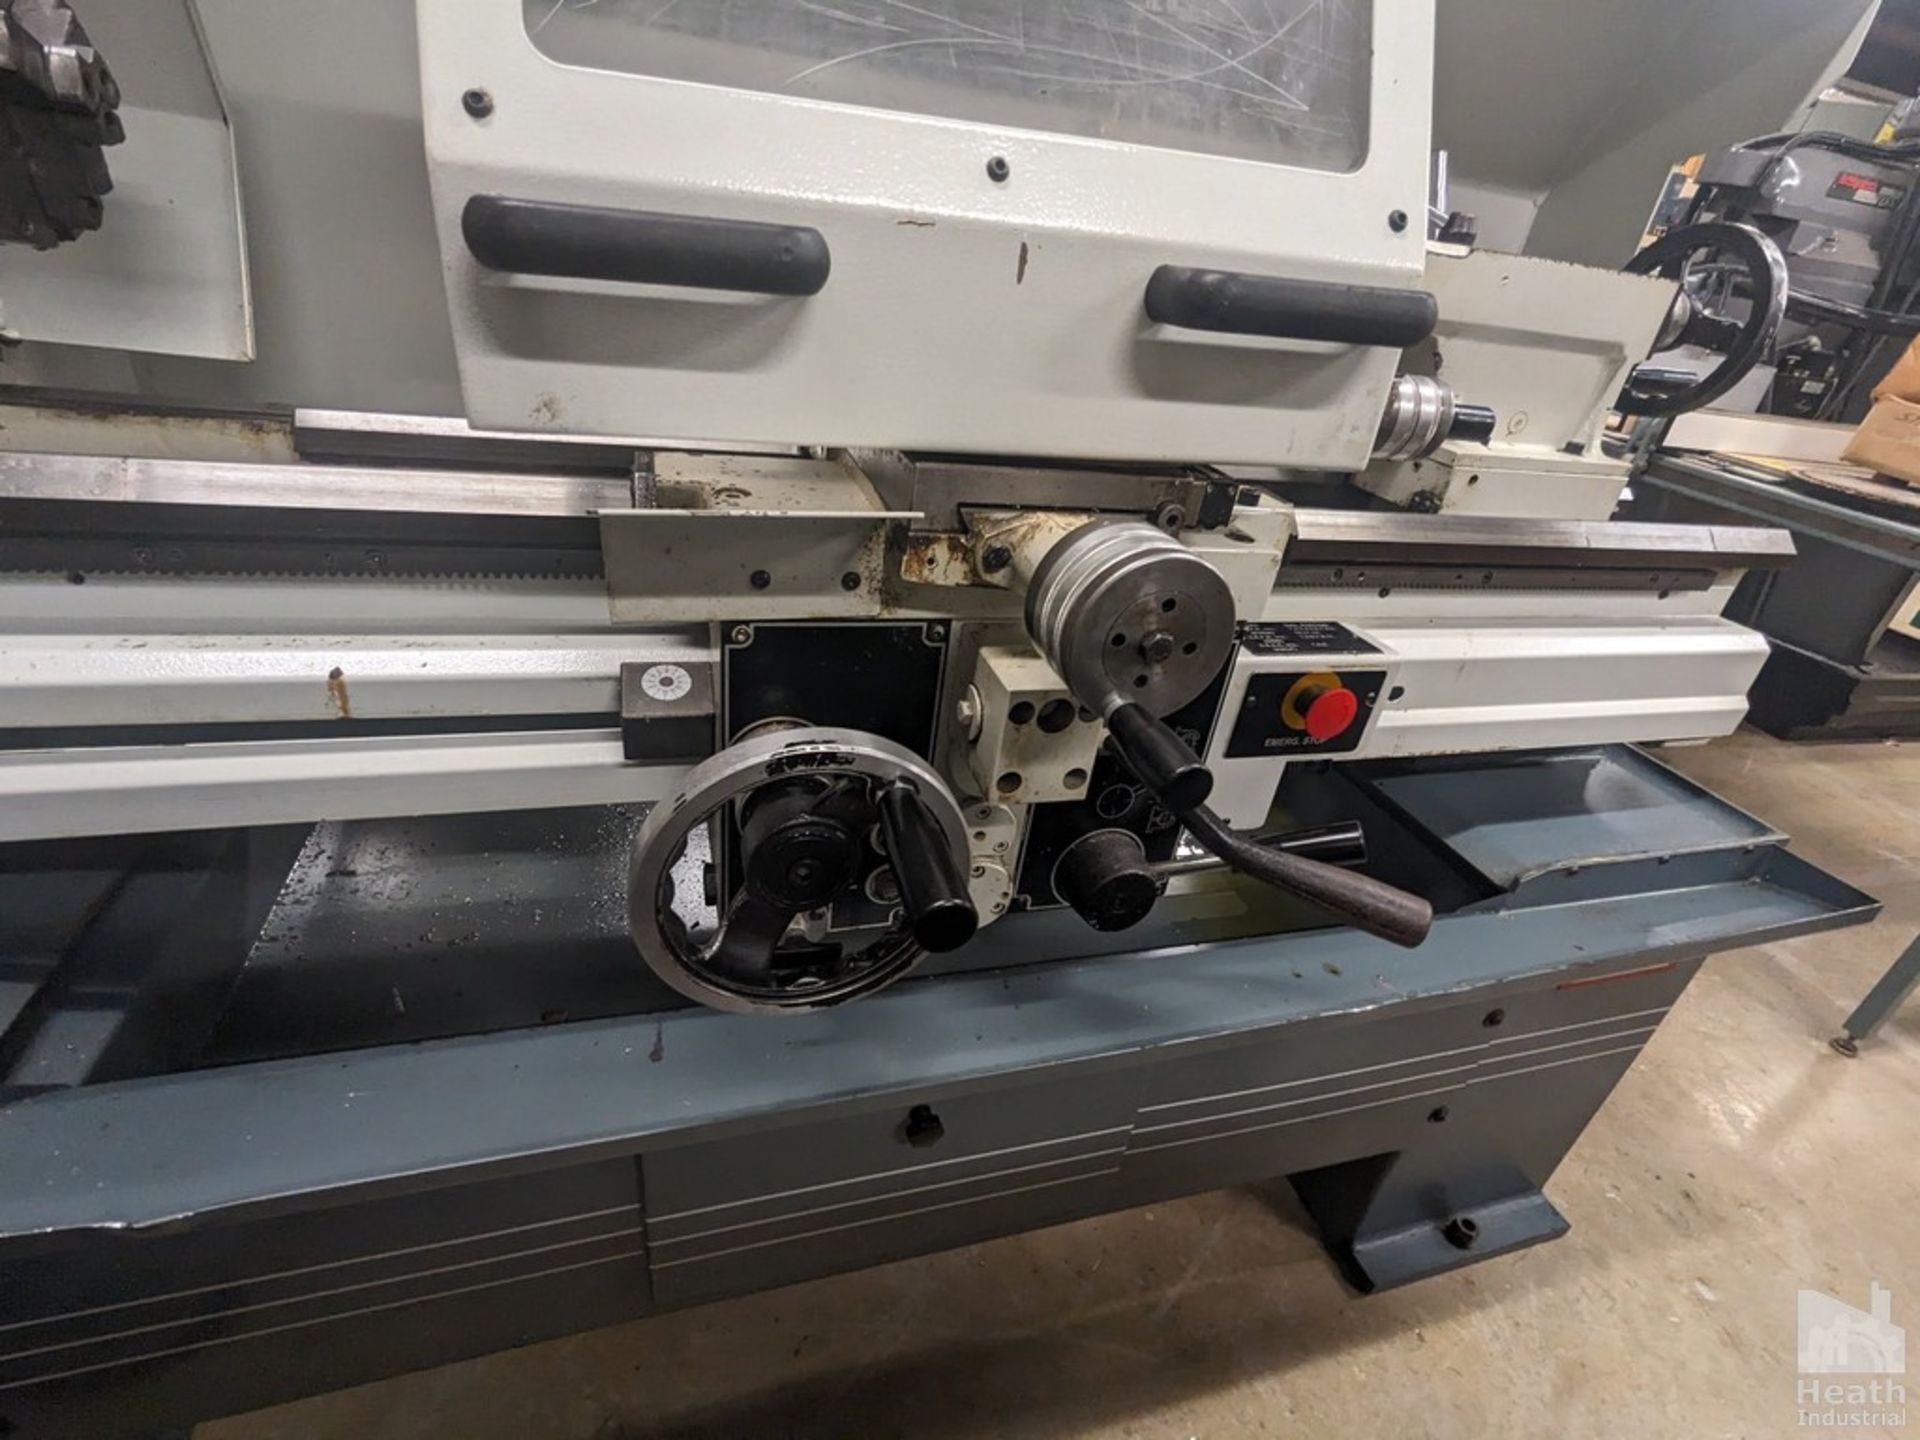 CLAUSING-METOSA 13"X40" MODEL 1340S TOOLROOM LATHE, S/N 49908. 2500 SPINDLE RPM, WITH 6" 3-JAW - Image 7 of 8